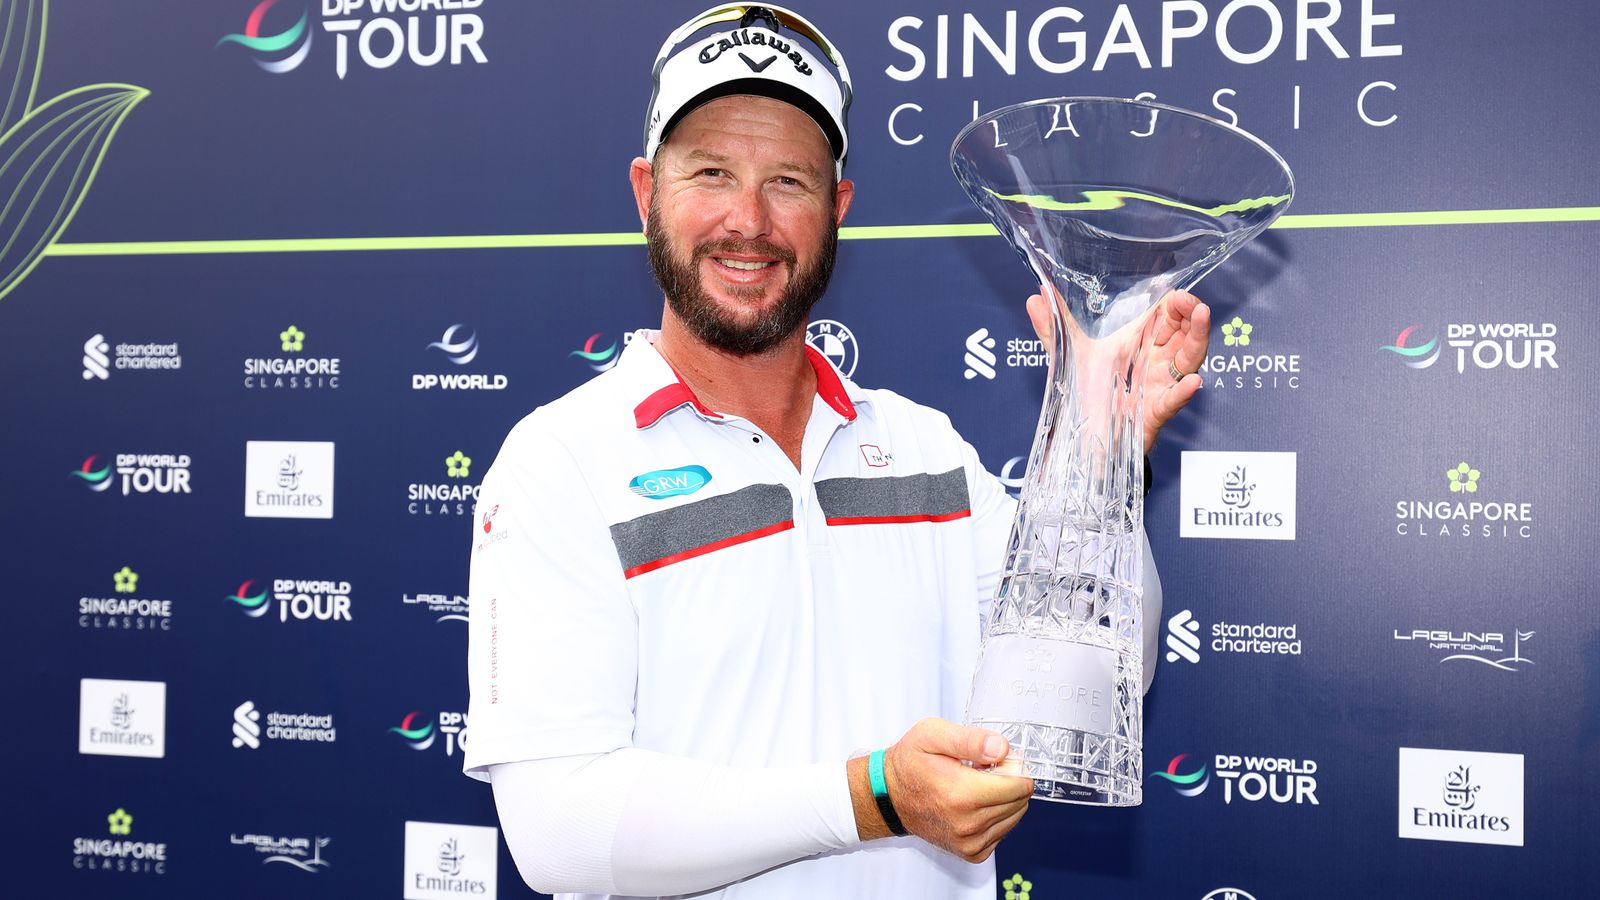 Singapore Classic Ockie Strydom powers up the leaderboard to clinch